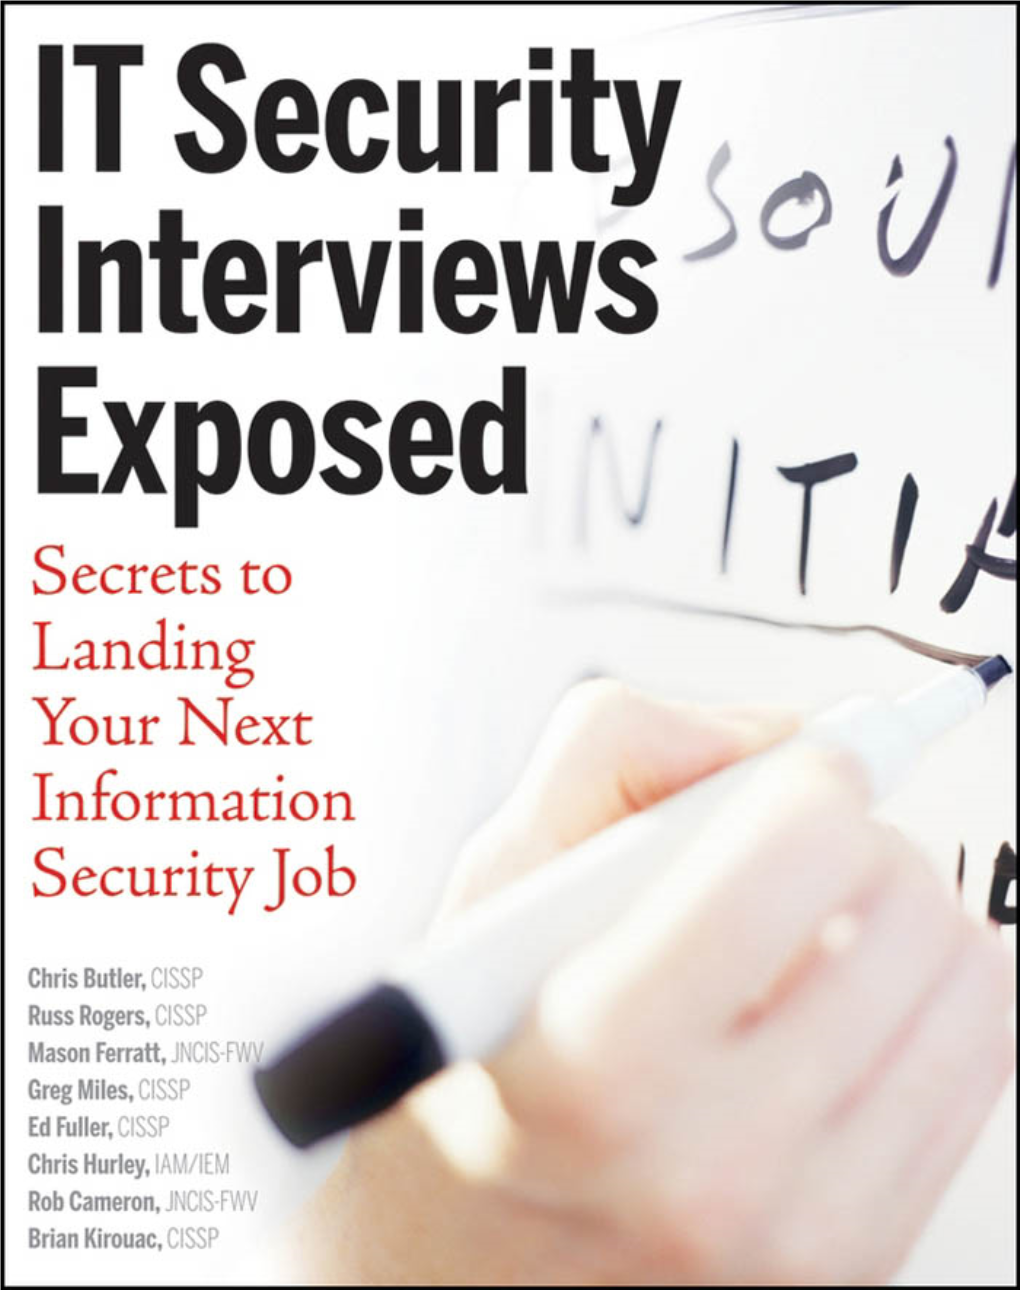 IT Security Interviews Exposed Secrets to Landing Your Next Information Security Job